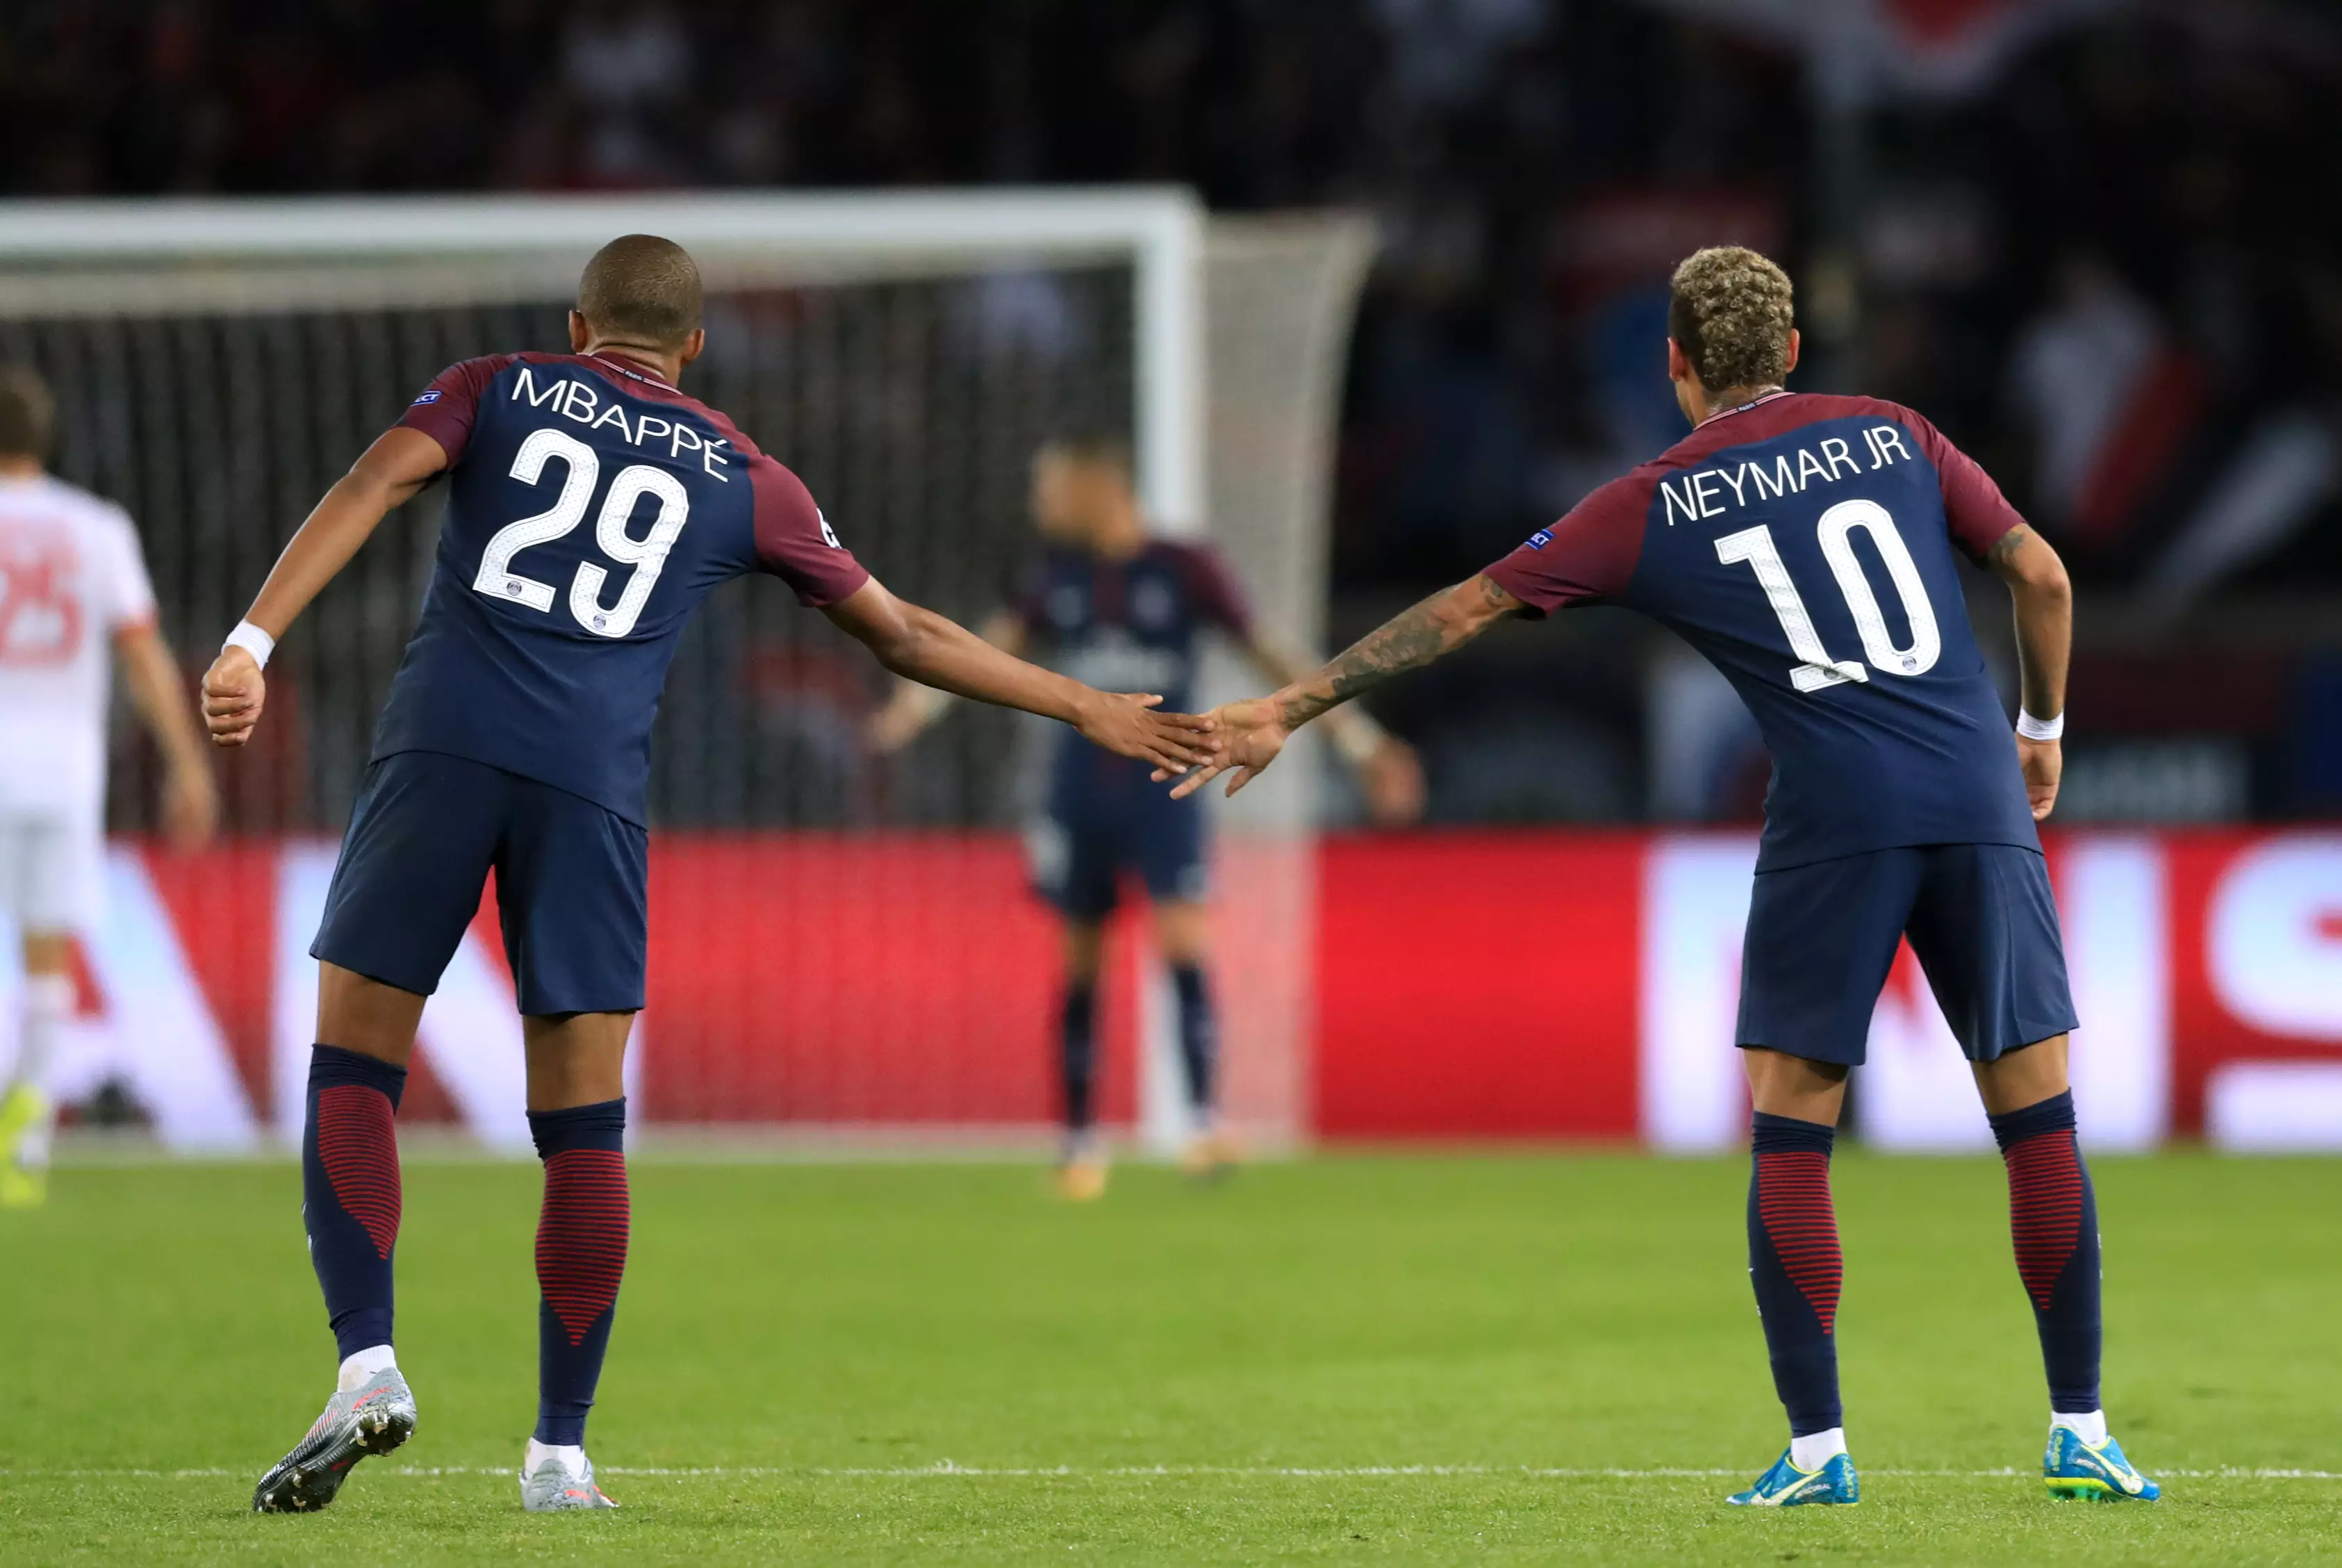 No one expected PSG could sign Neymar and Mbappe in the same summer. Image: PA Images